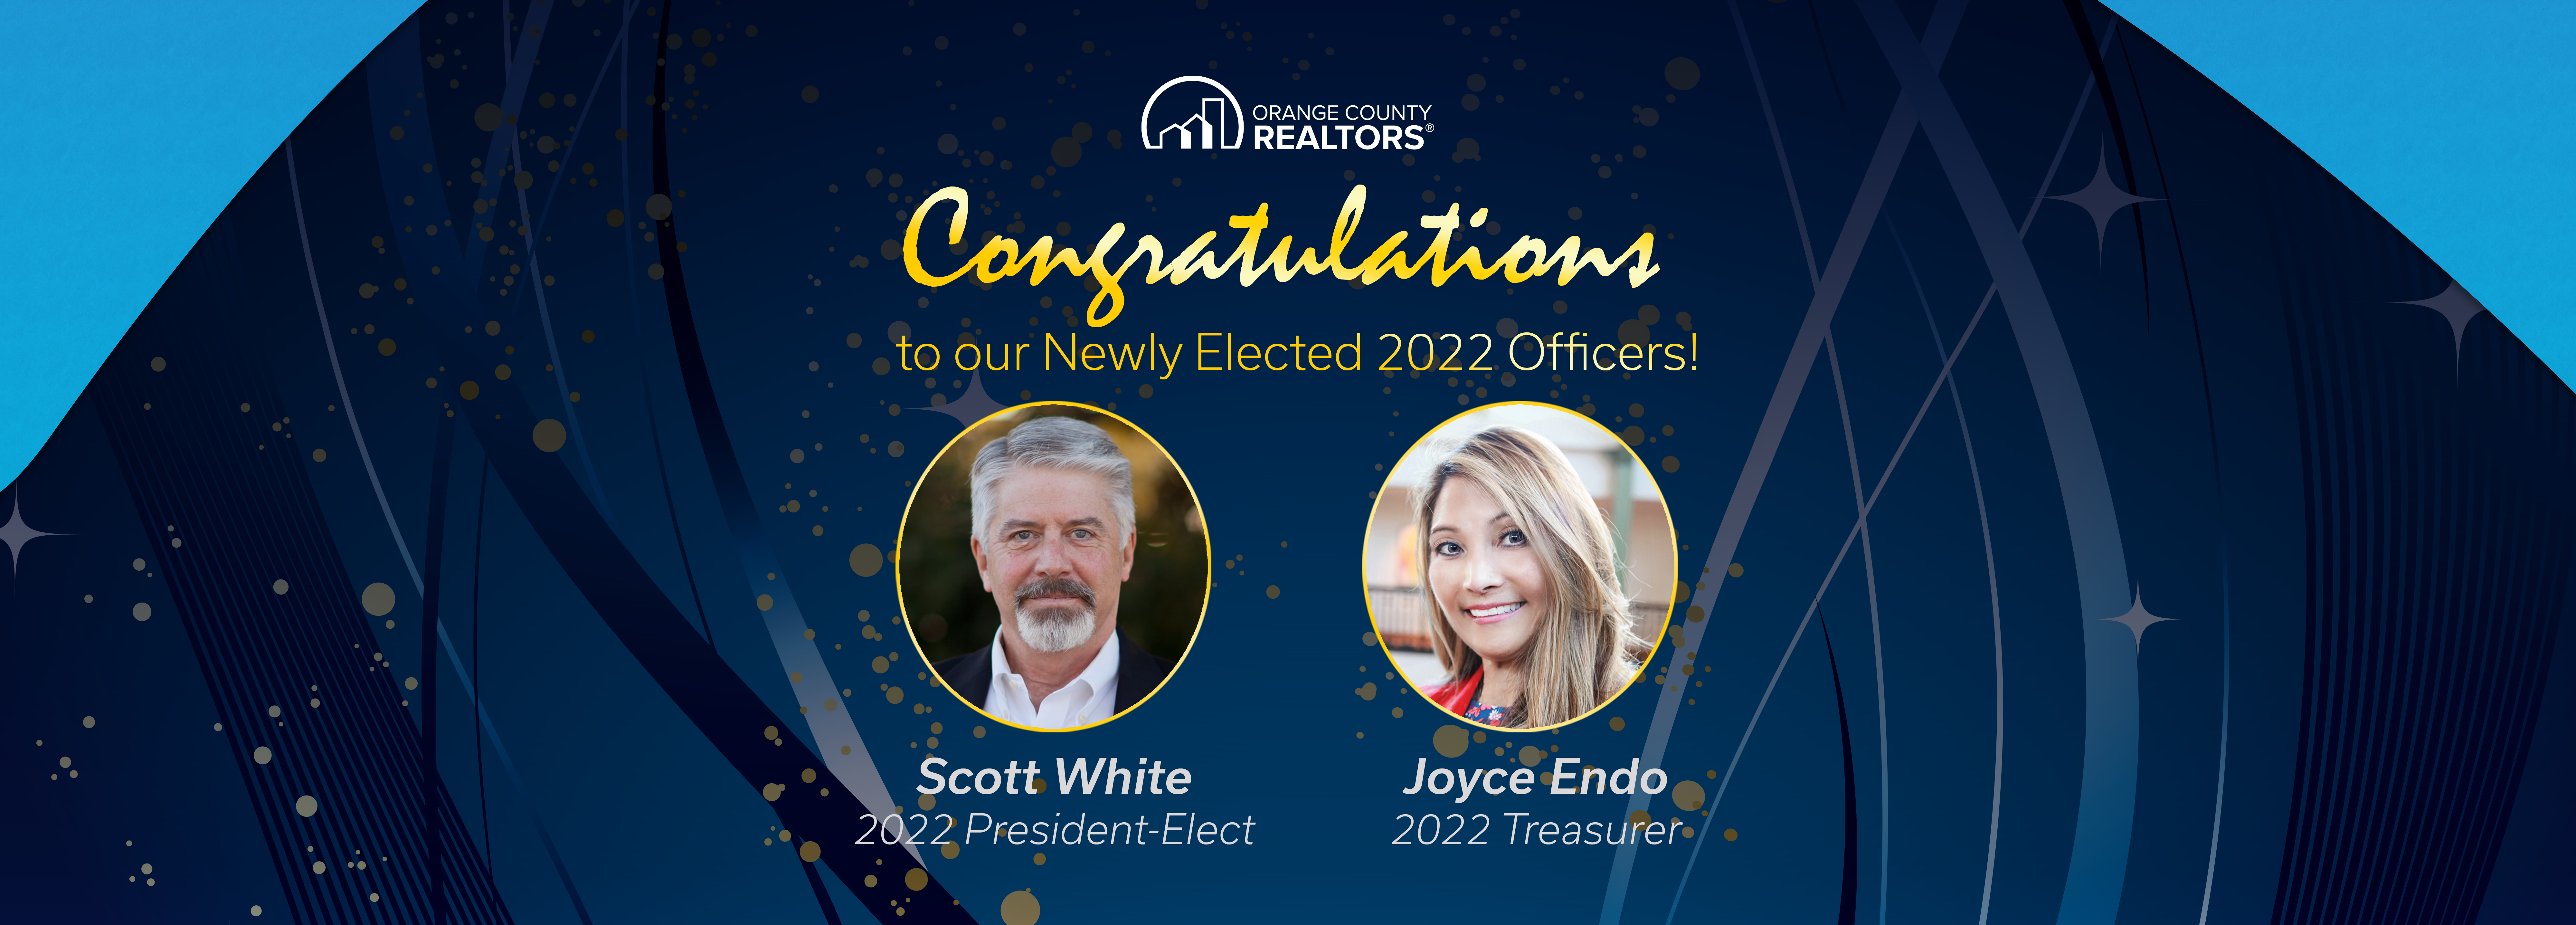 Congratulations to our newly elected 2022 Officers! Scott White, 2022 President-Elect, and Joyce Endo, 2022 Treasurer